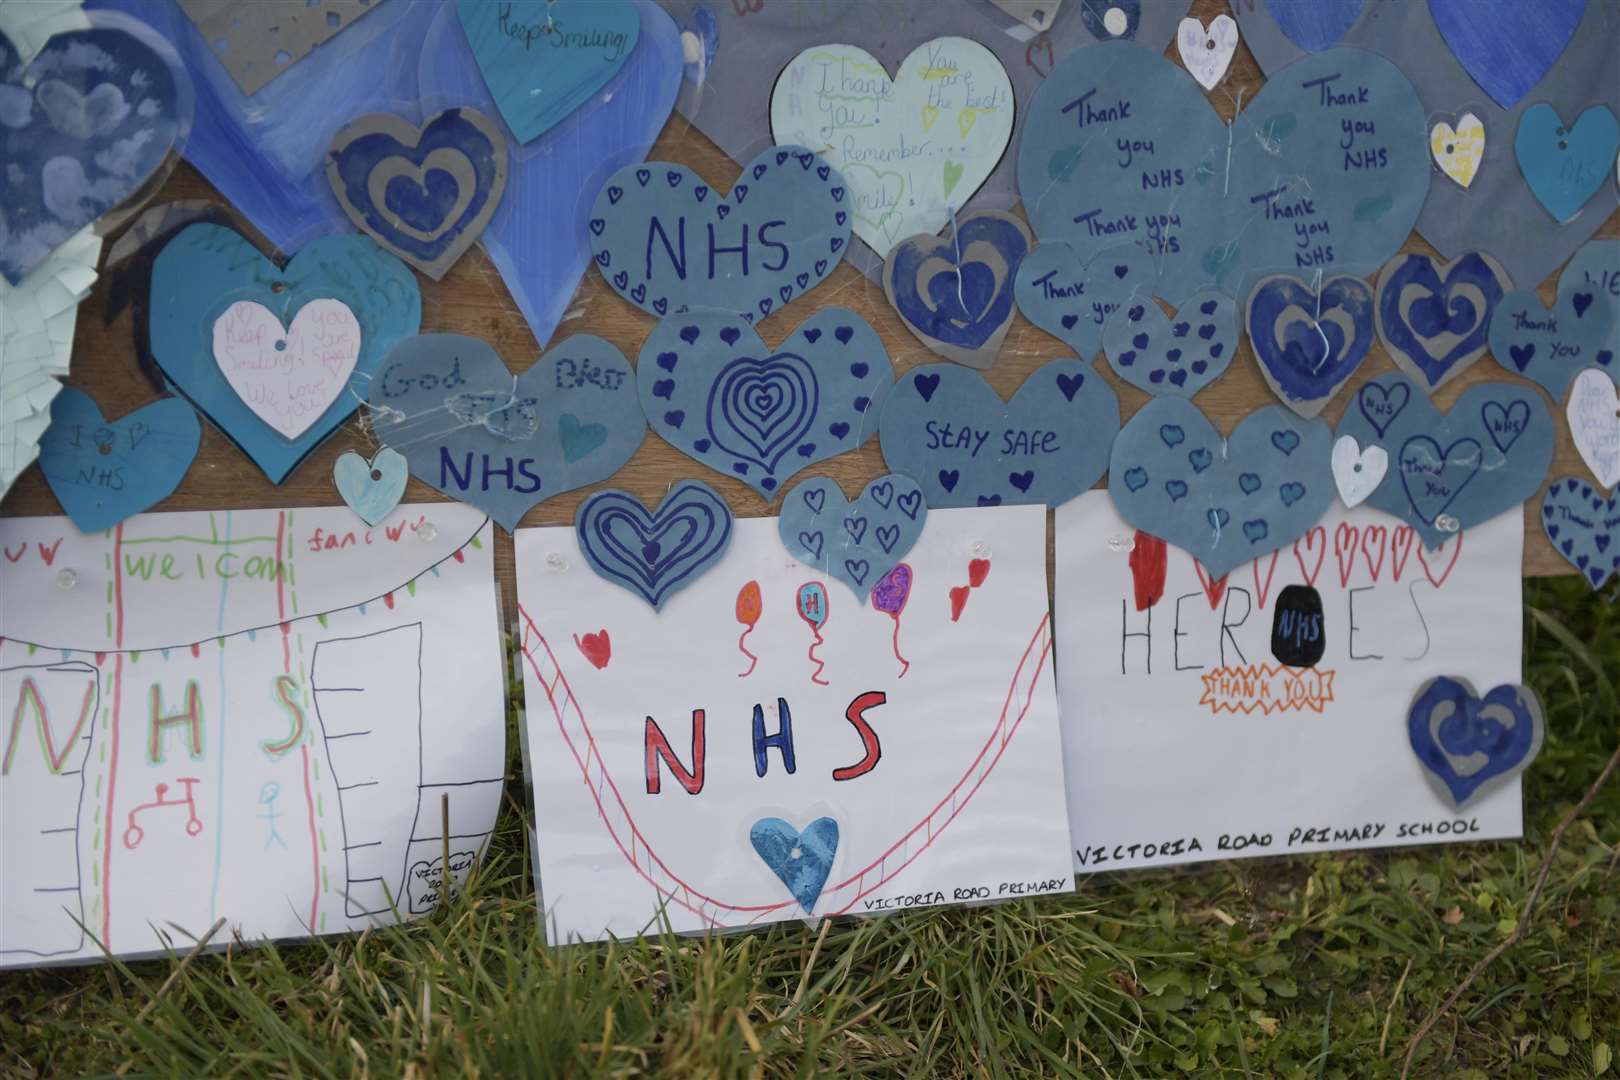 Pupils from primary schools in the area helped to make posters and blue hearts